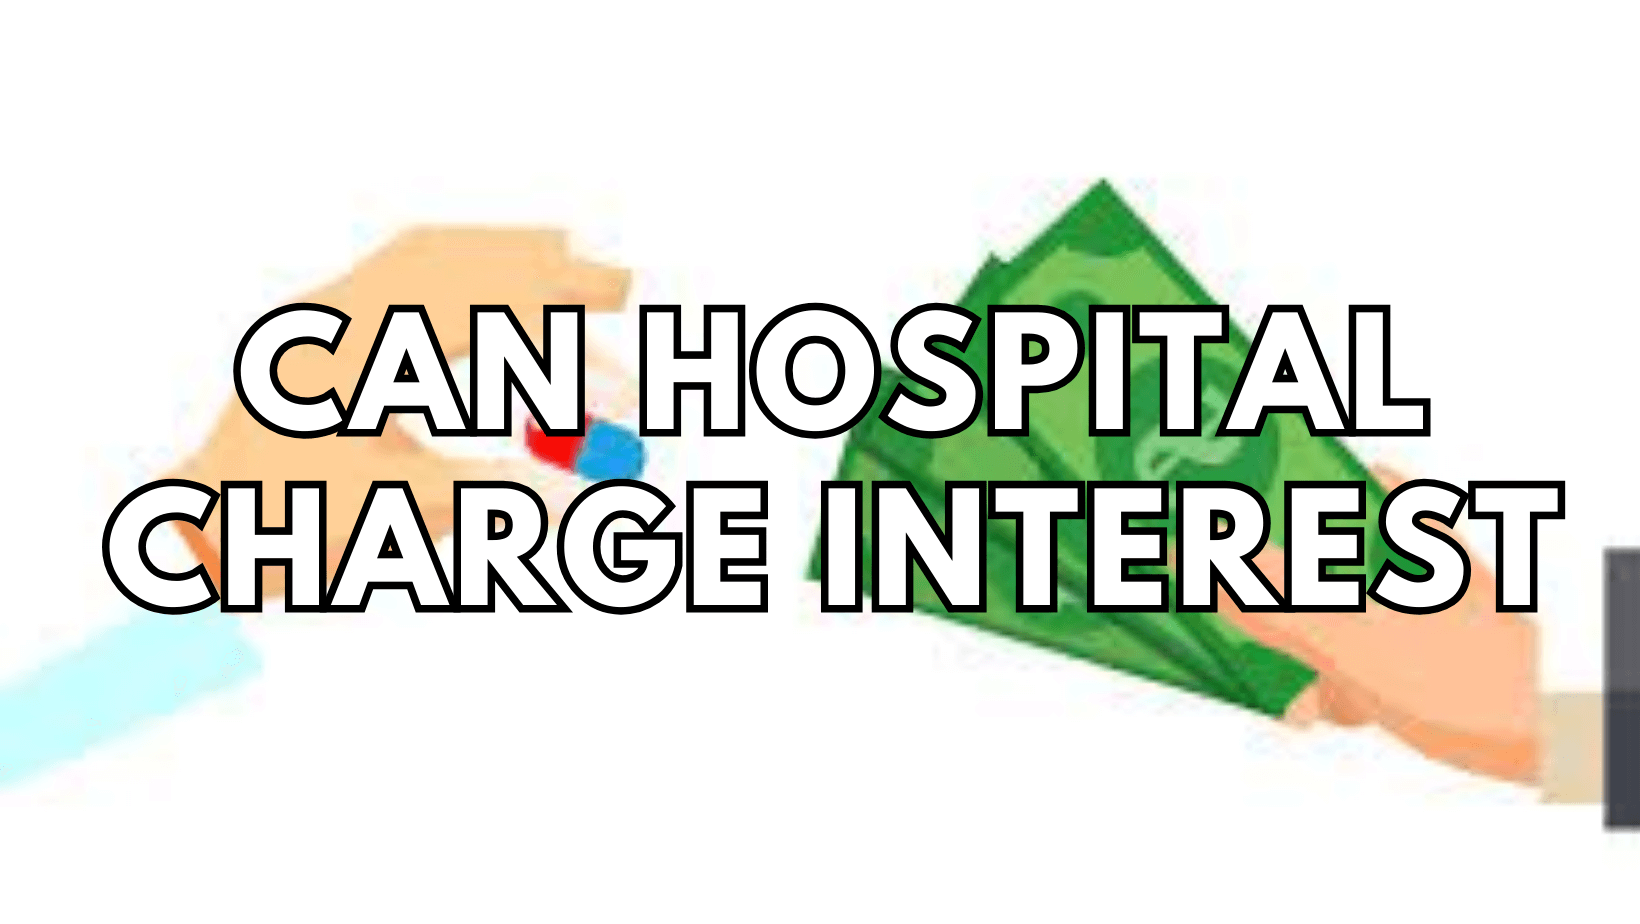 can hospital charge interest featured image